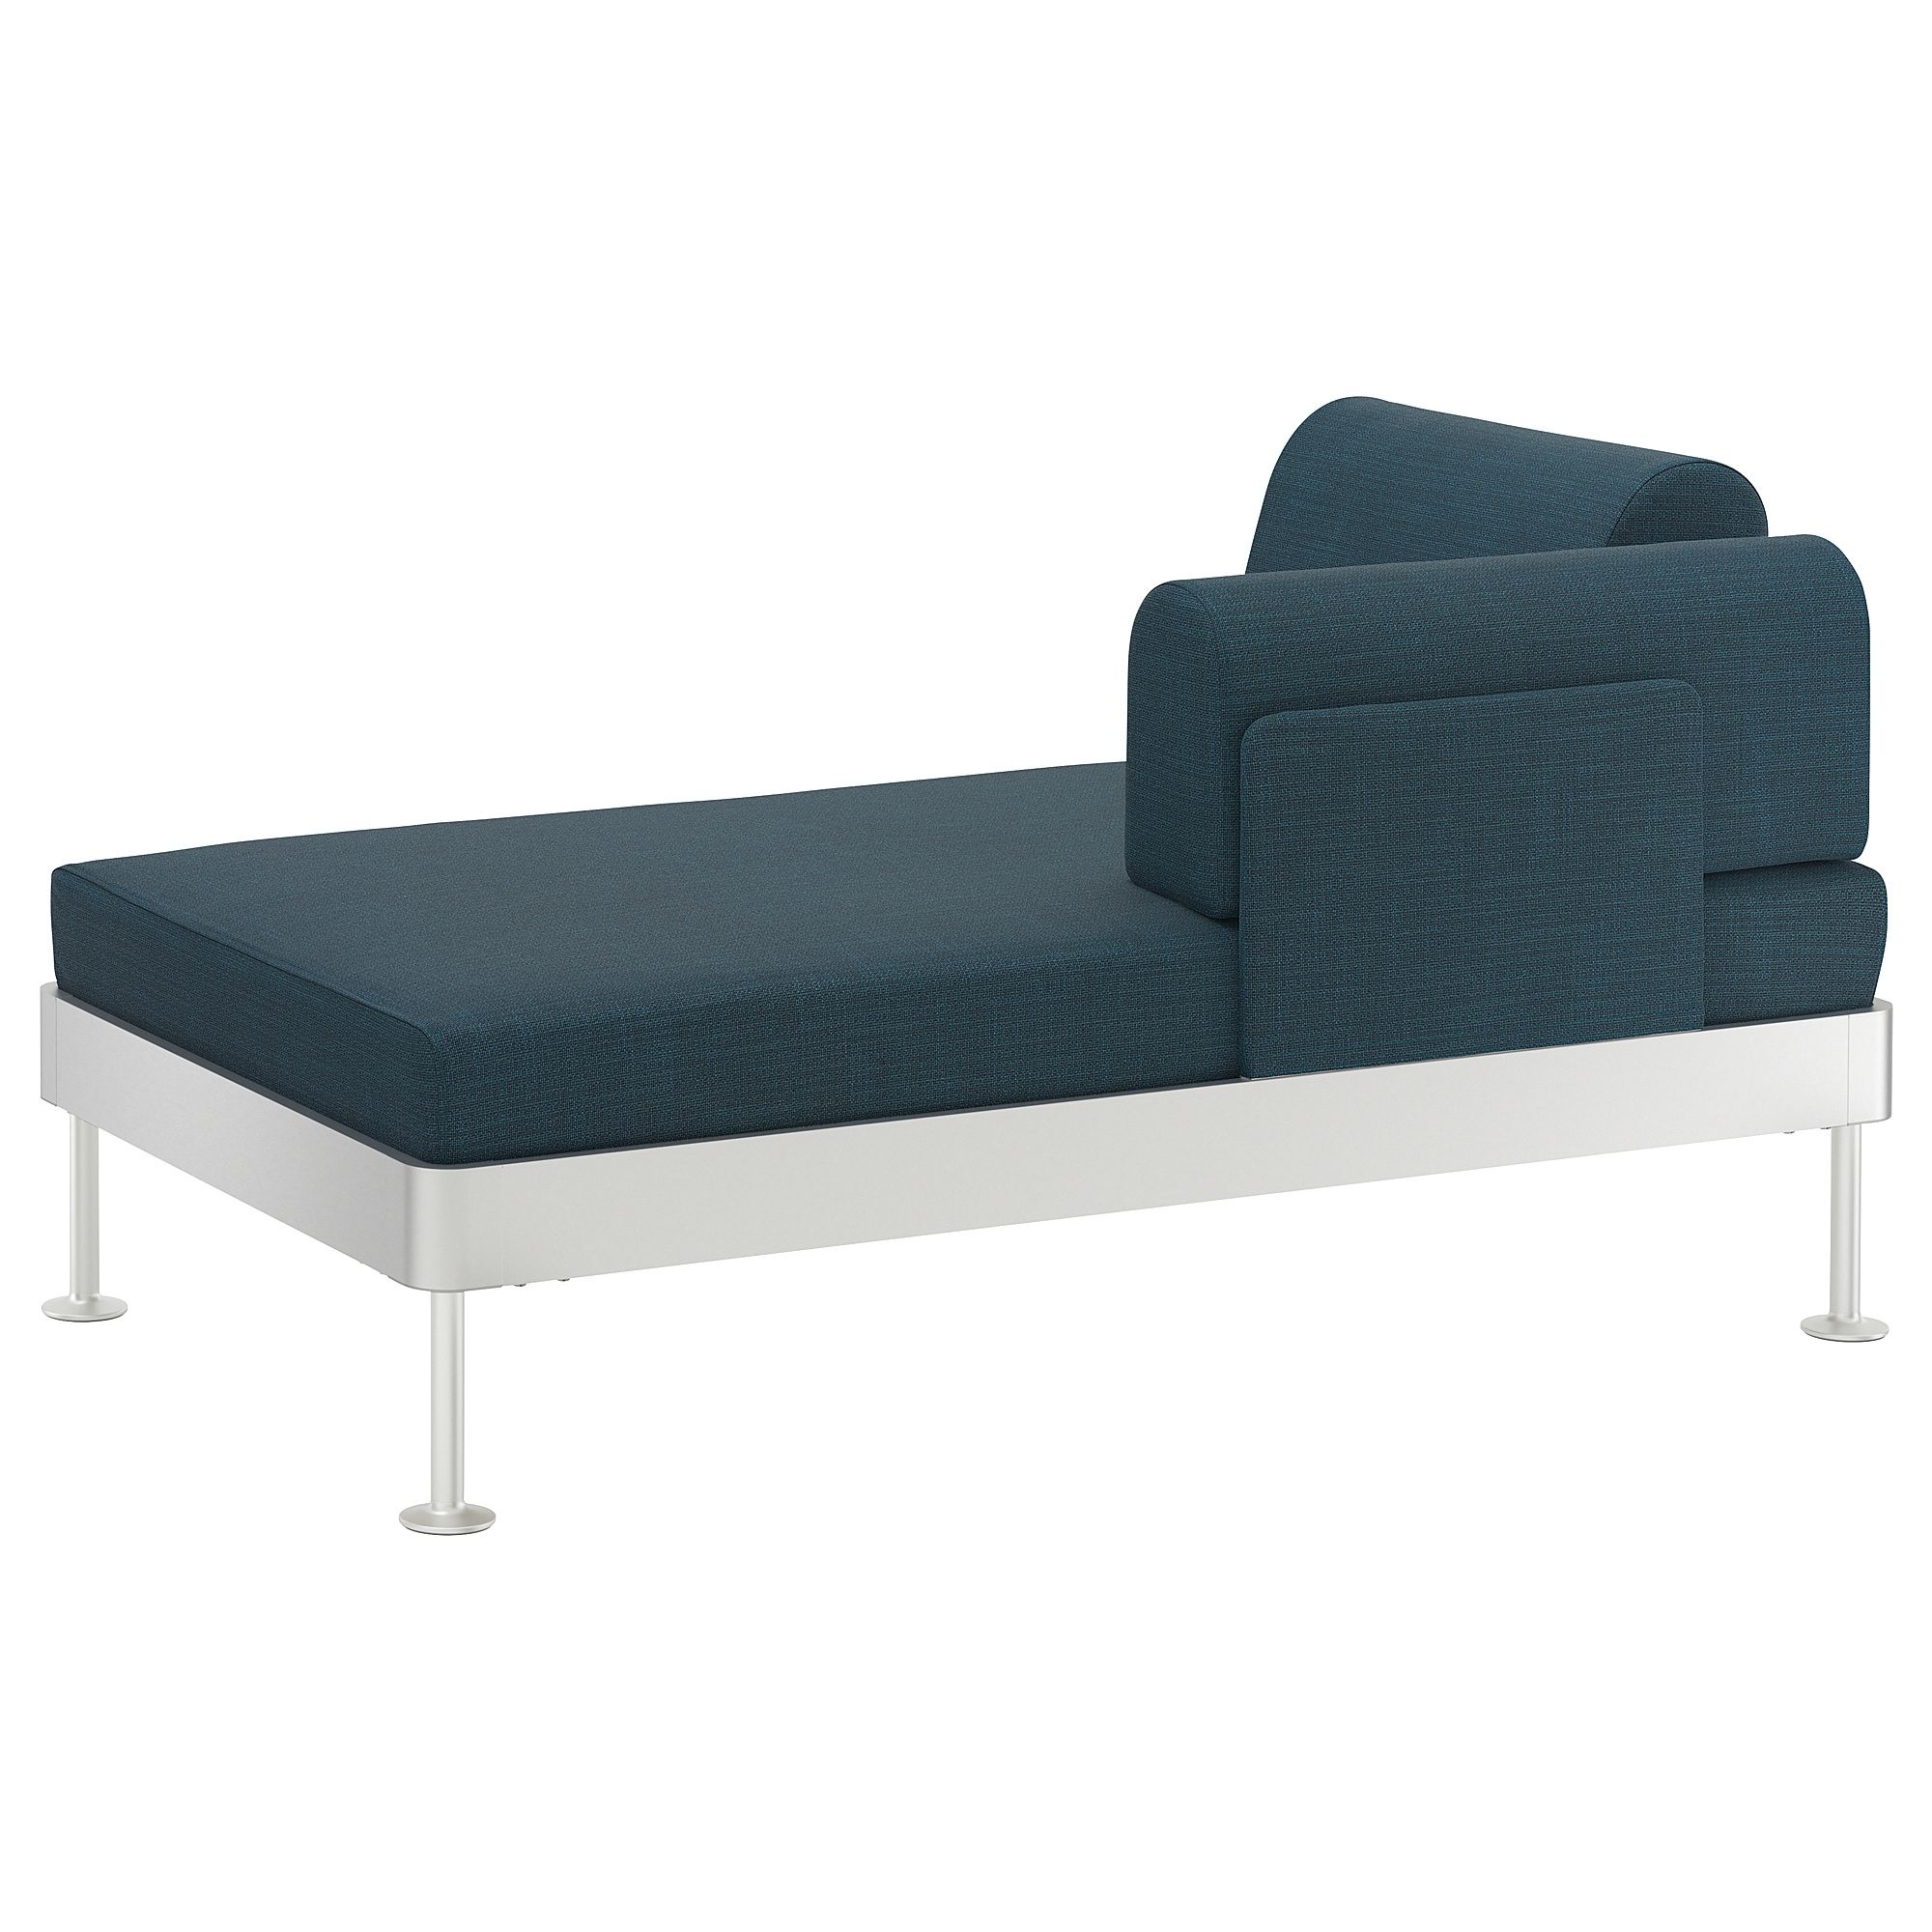 Ikea Chaise Longues In Famous Delaktig Chaise Longue With Armrest Hillared Dark Blue – Ikea (View 1 of 15)